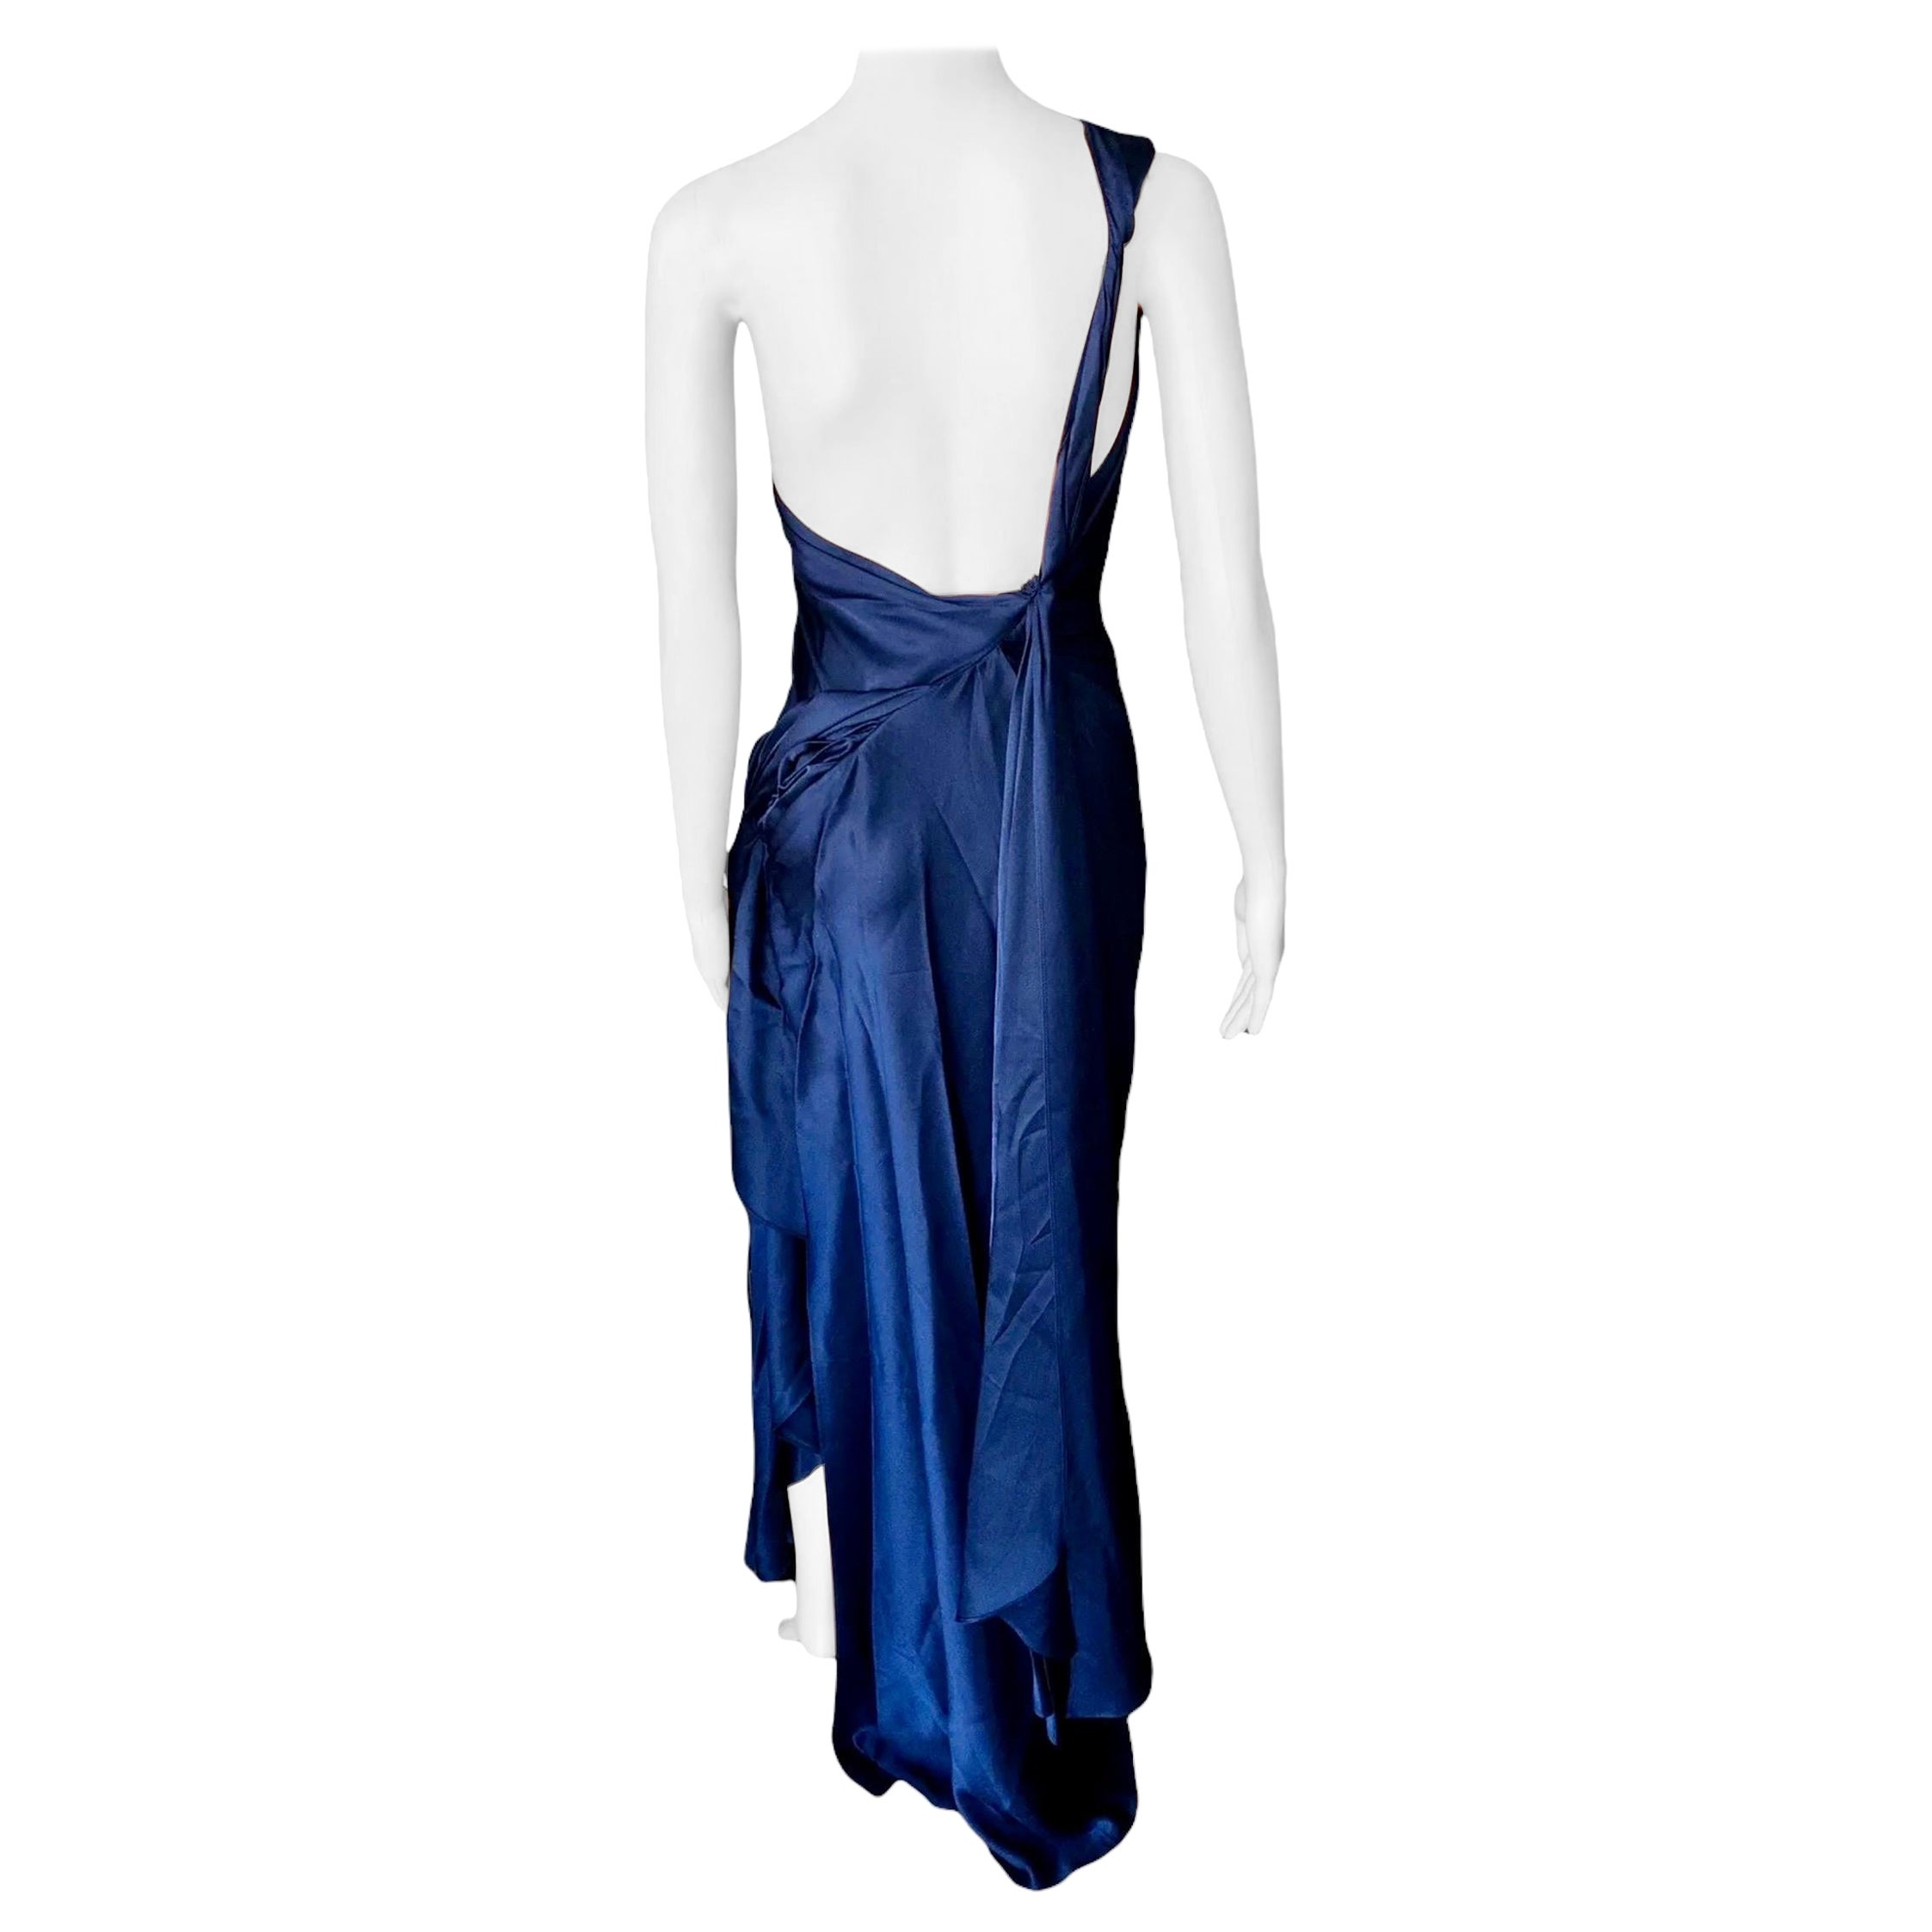 Yves Saint Laurent F/W 2010 Runway One Shoulder Backless Navy Evening Dress Gown